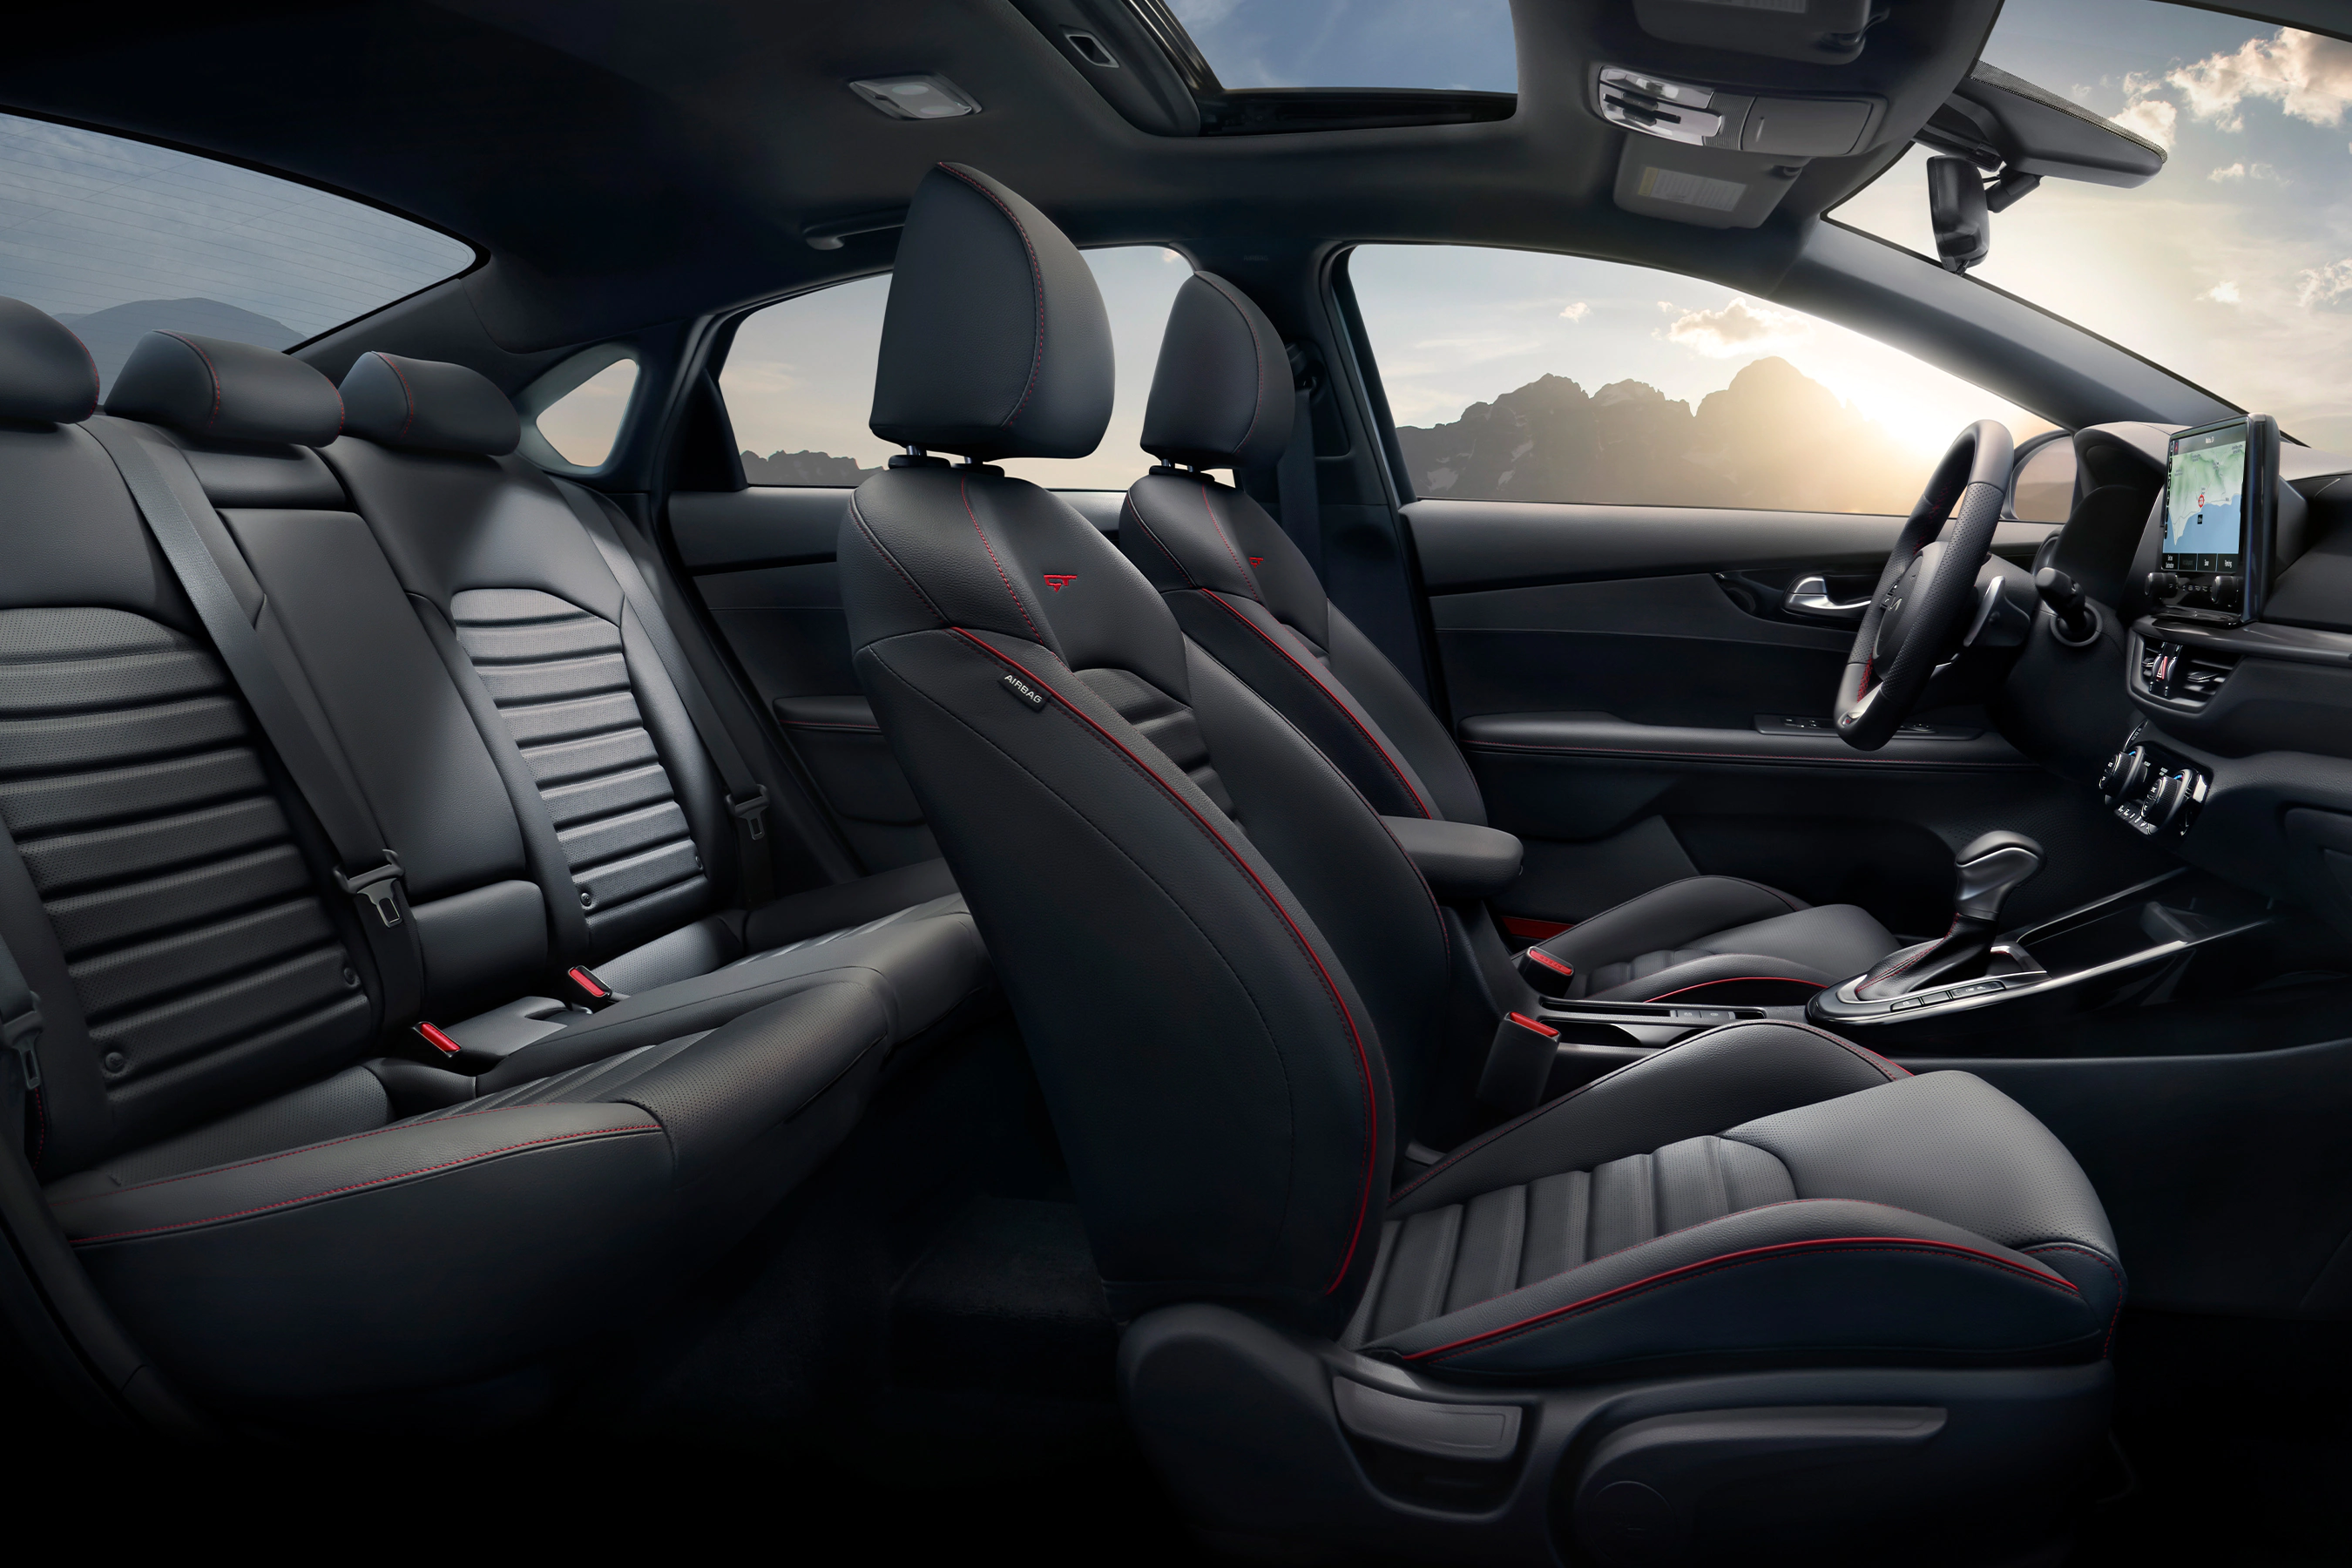 2022 Kia Forte has an available 111 cu ft of cabin space